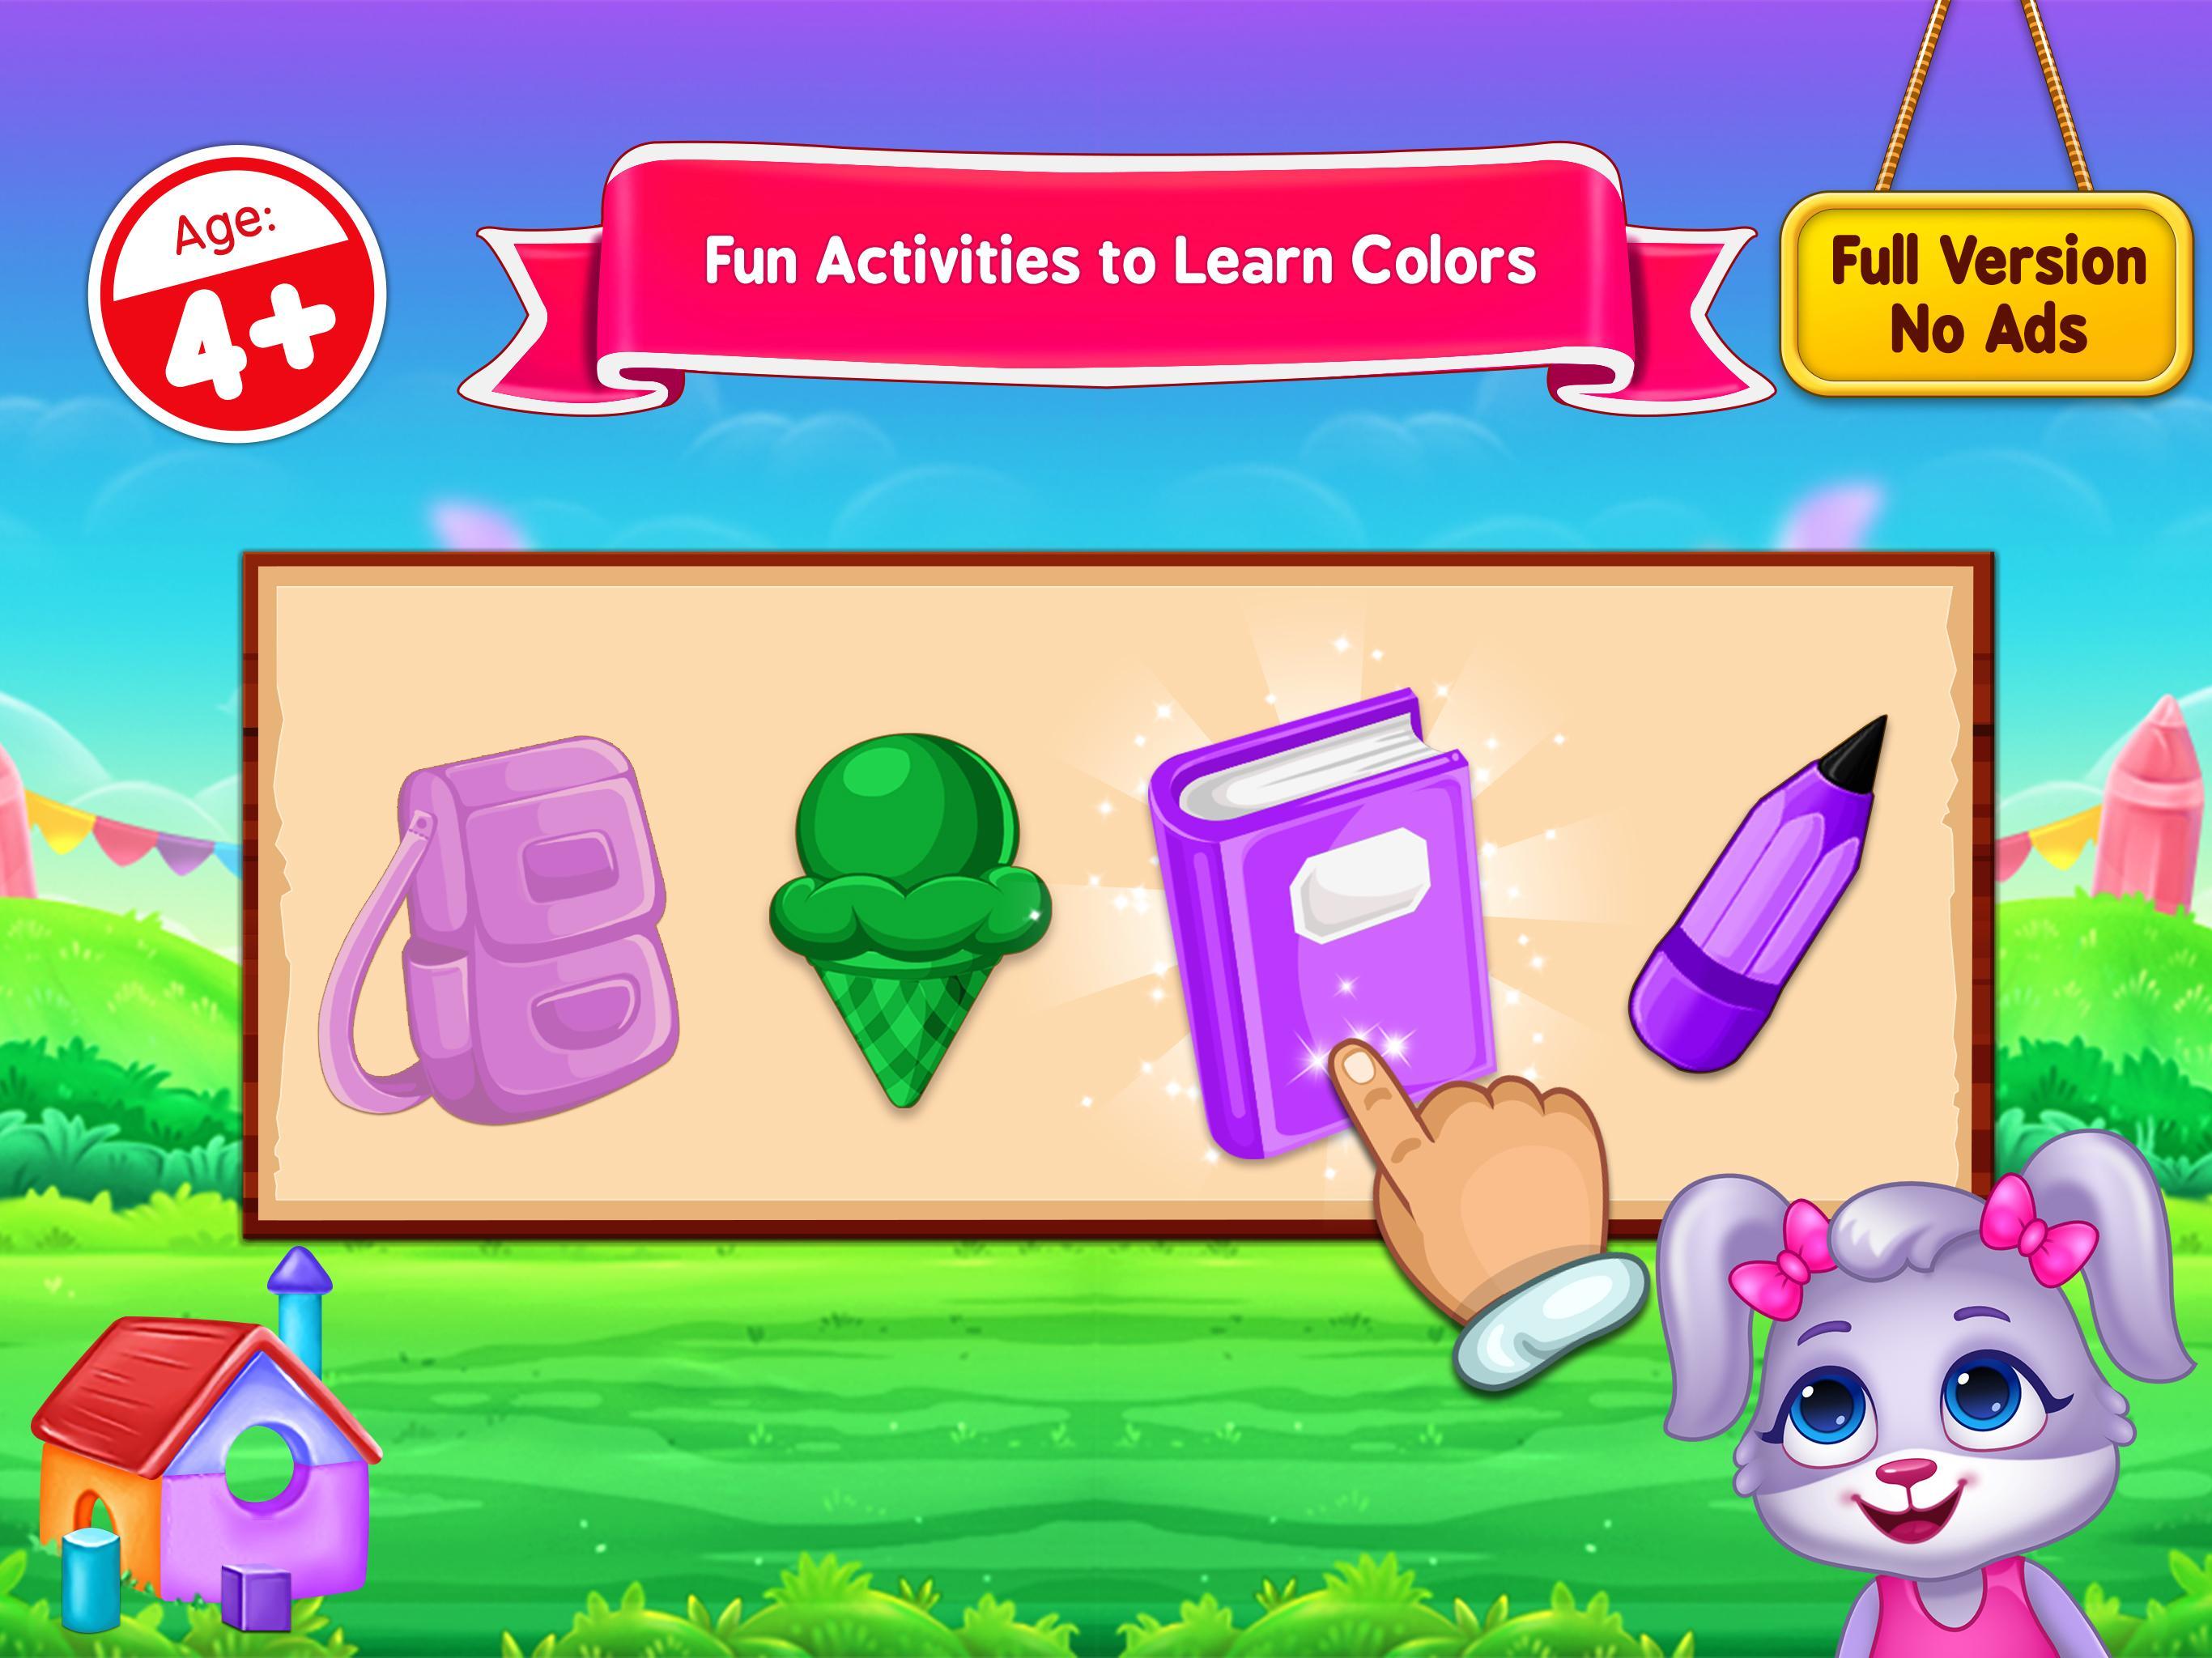 Colors & Shapes - Kids Learn Color and Shape 1.2.5 Screenshot 17